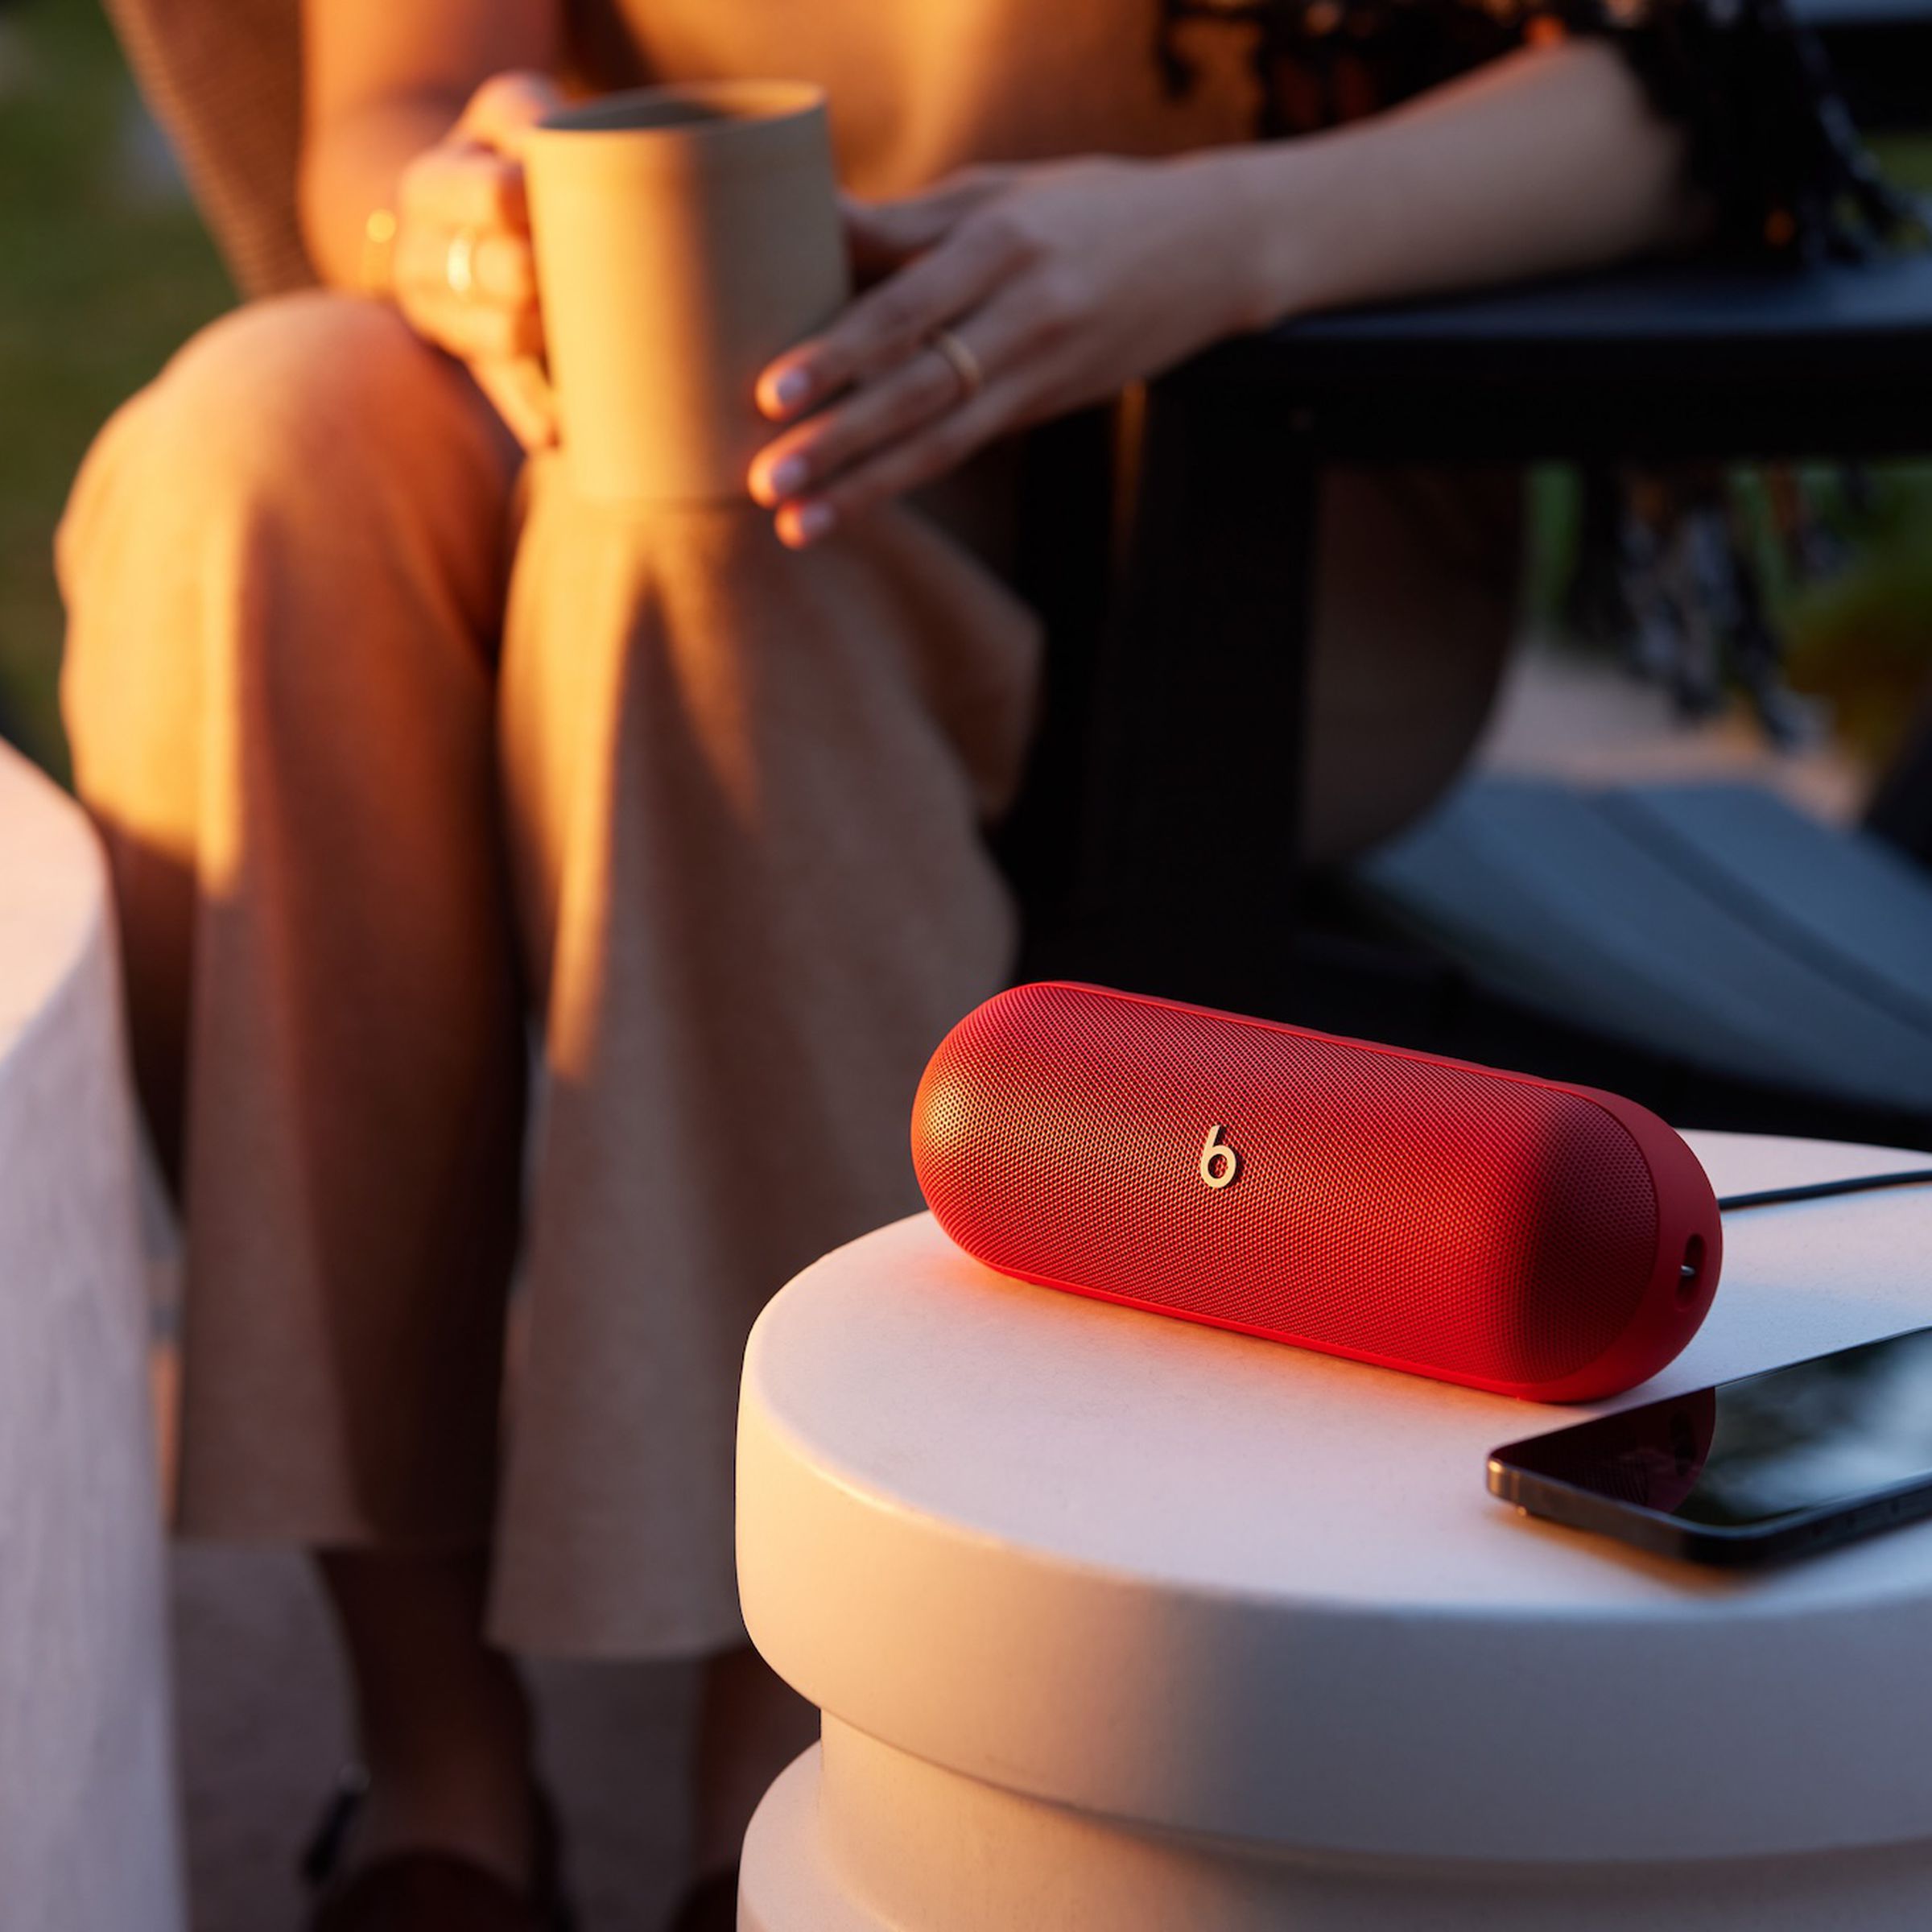 A marketing image of the Beats Pill speaker with someone holding a coffee mug in the background.